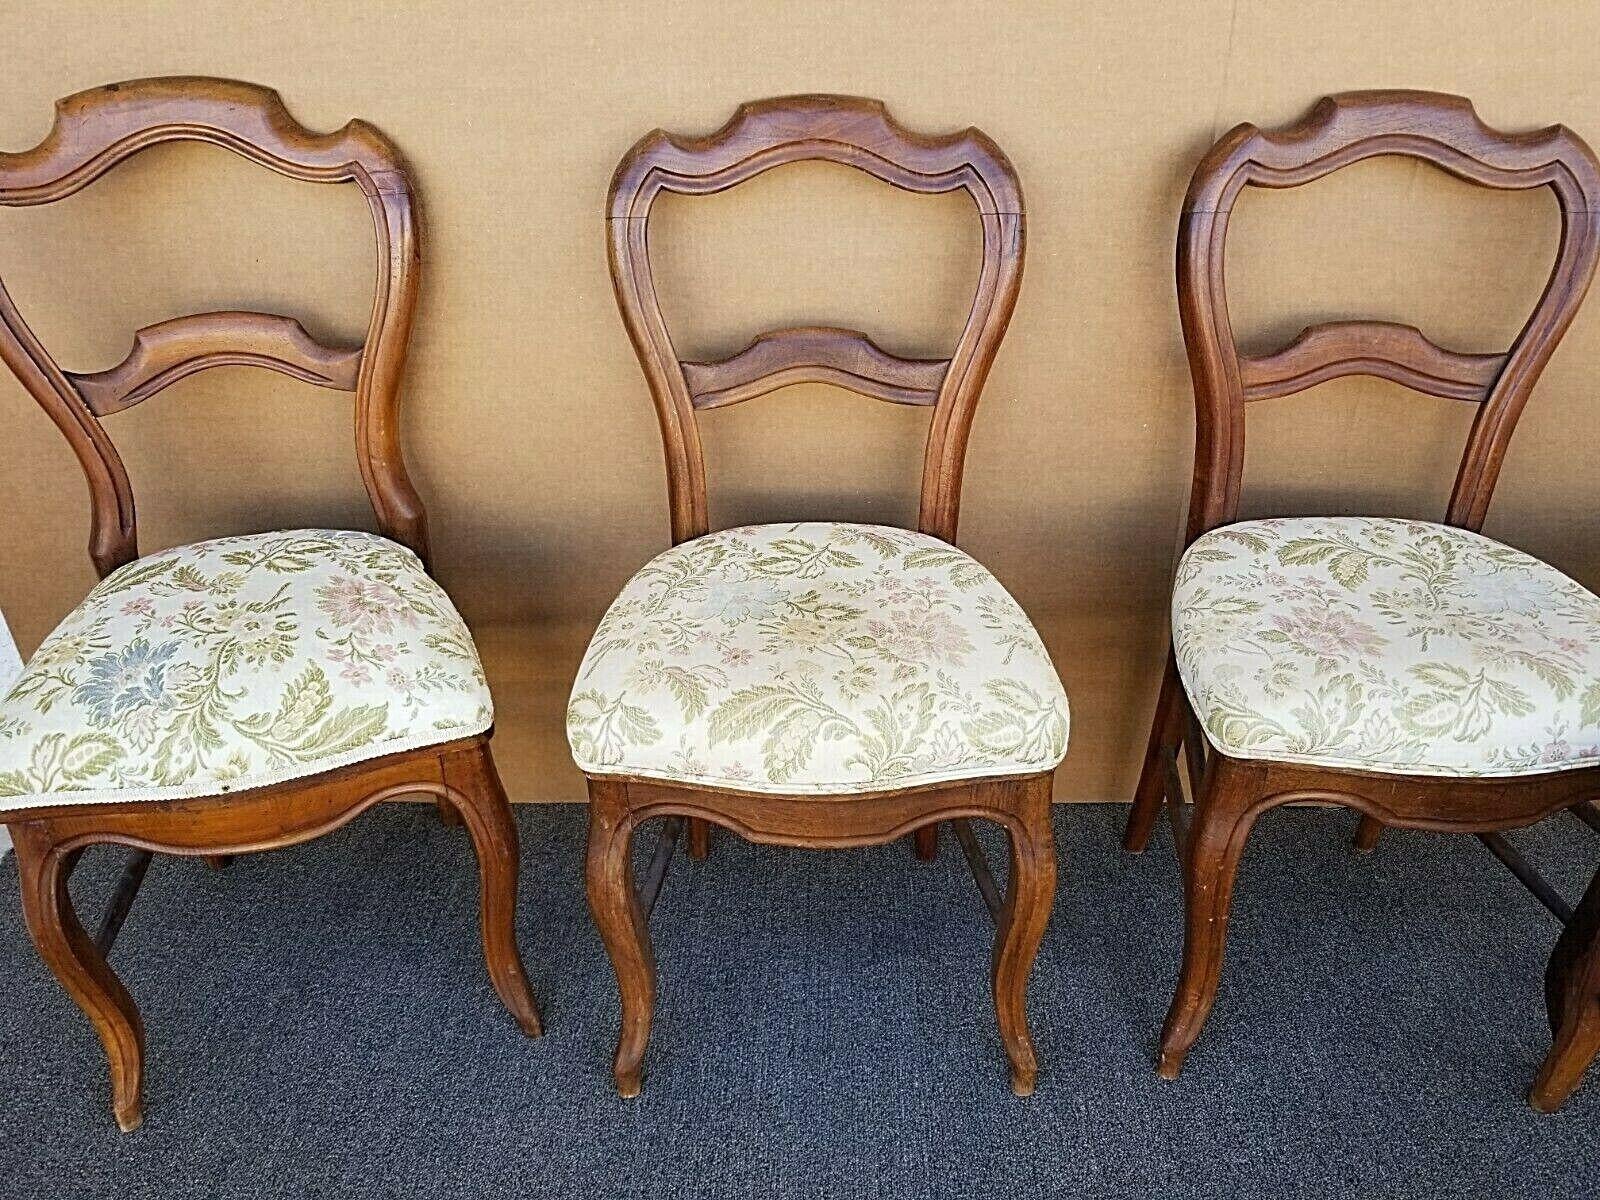 Mahogany Antique Victorian Balloon Back Chairs, Set of 7 For Sale